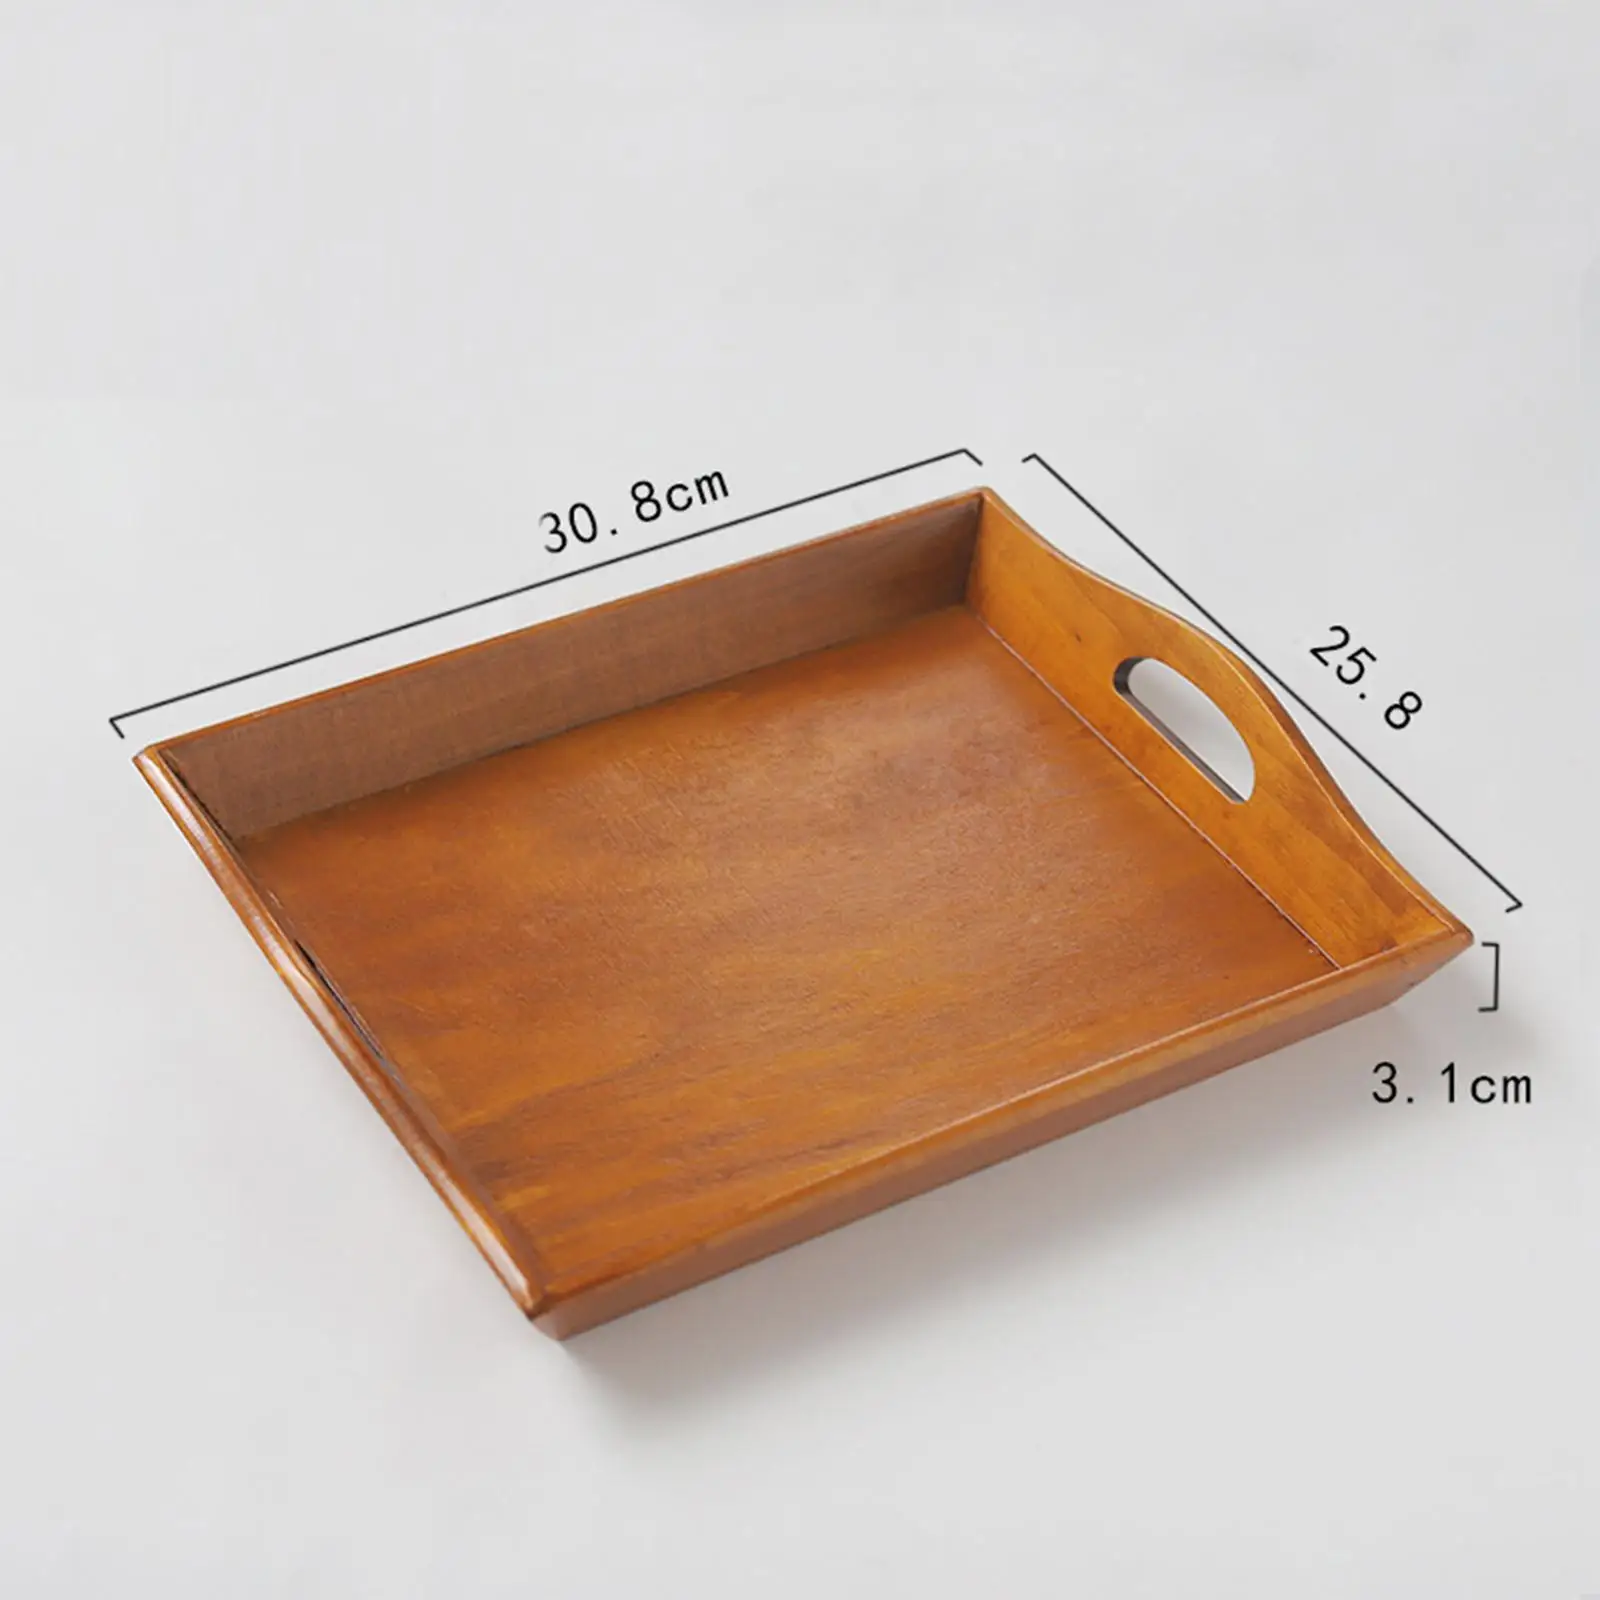 Elegant Wooden Serving Tray with Convenient Handles for Ottoman, Food, Breakfast, Drinks